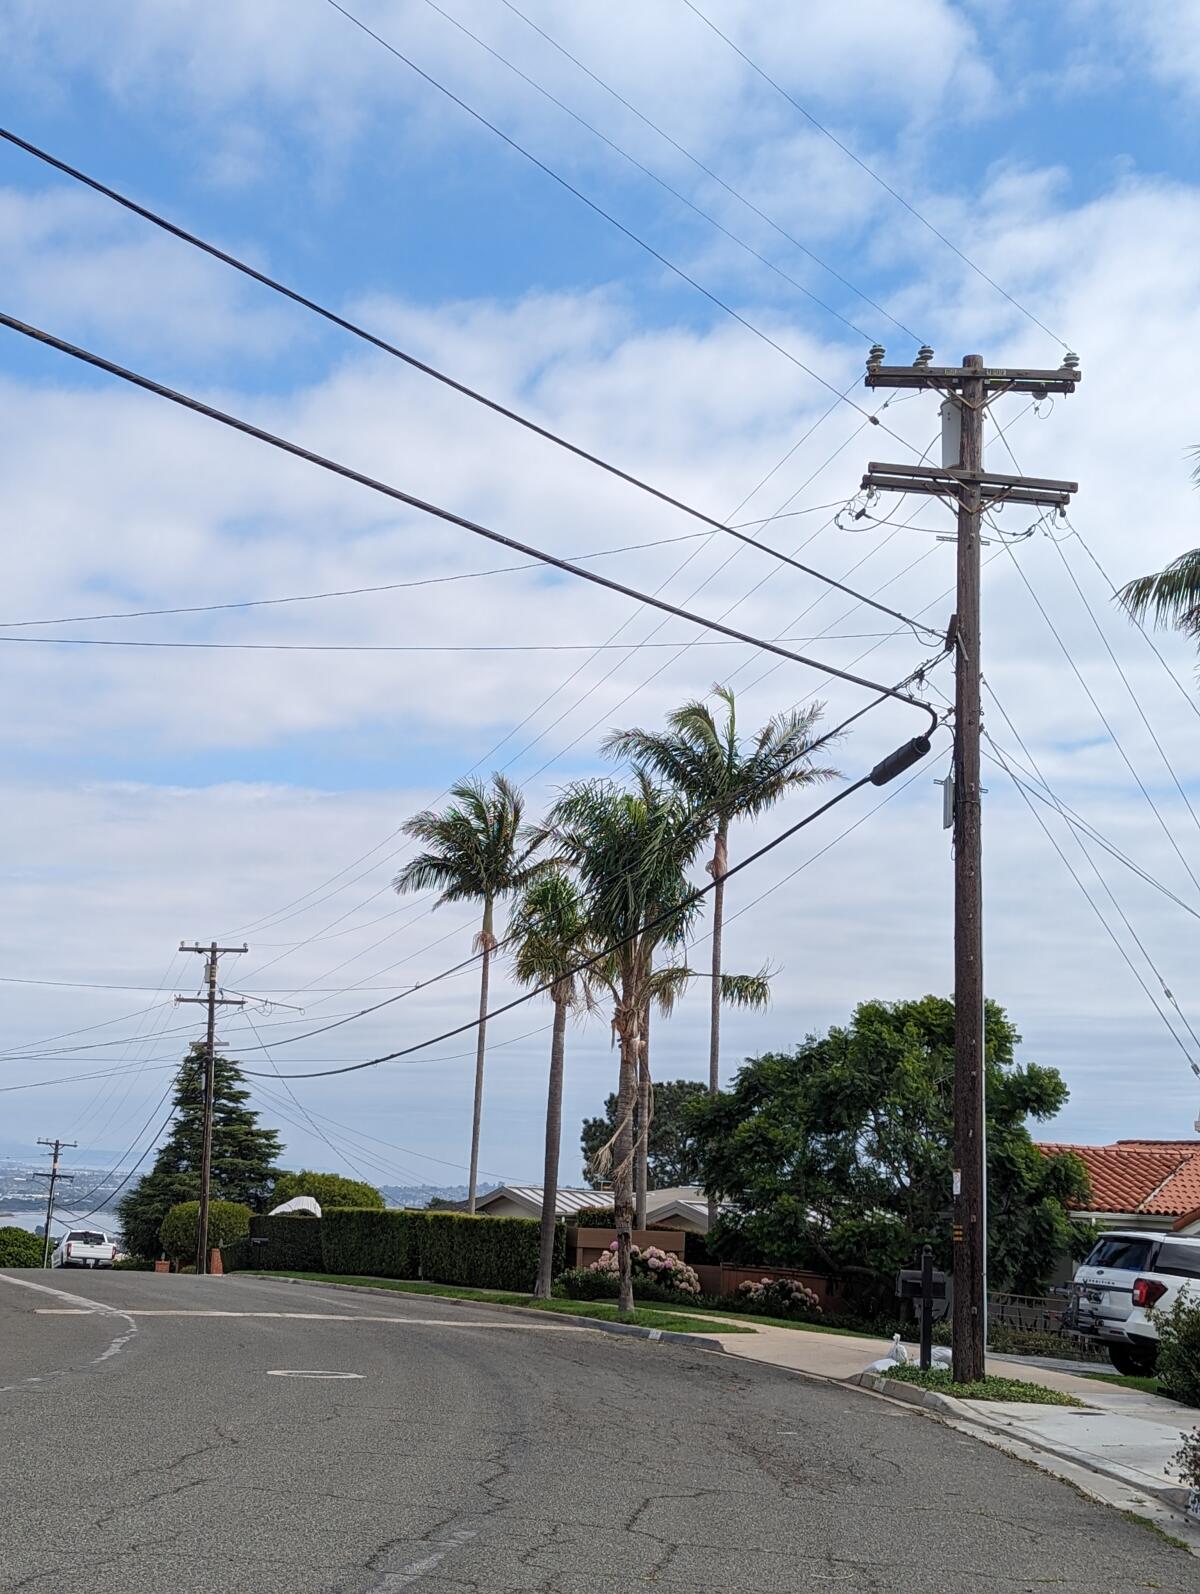 Overhead utility lines in La Jolla's Muirlands area near Avenida Chamnez are the subject of concern for several residents.